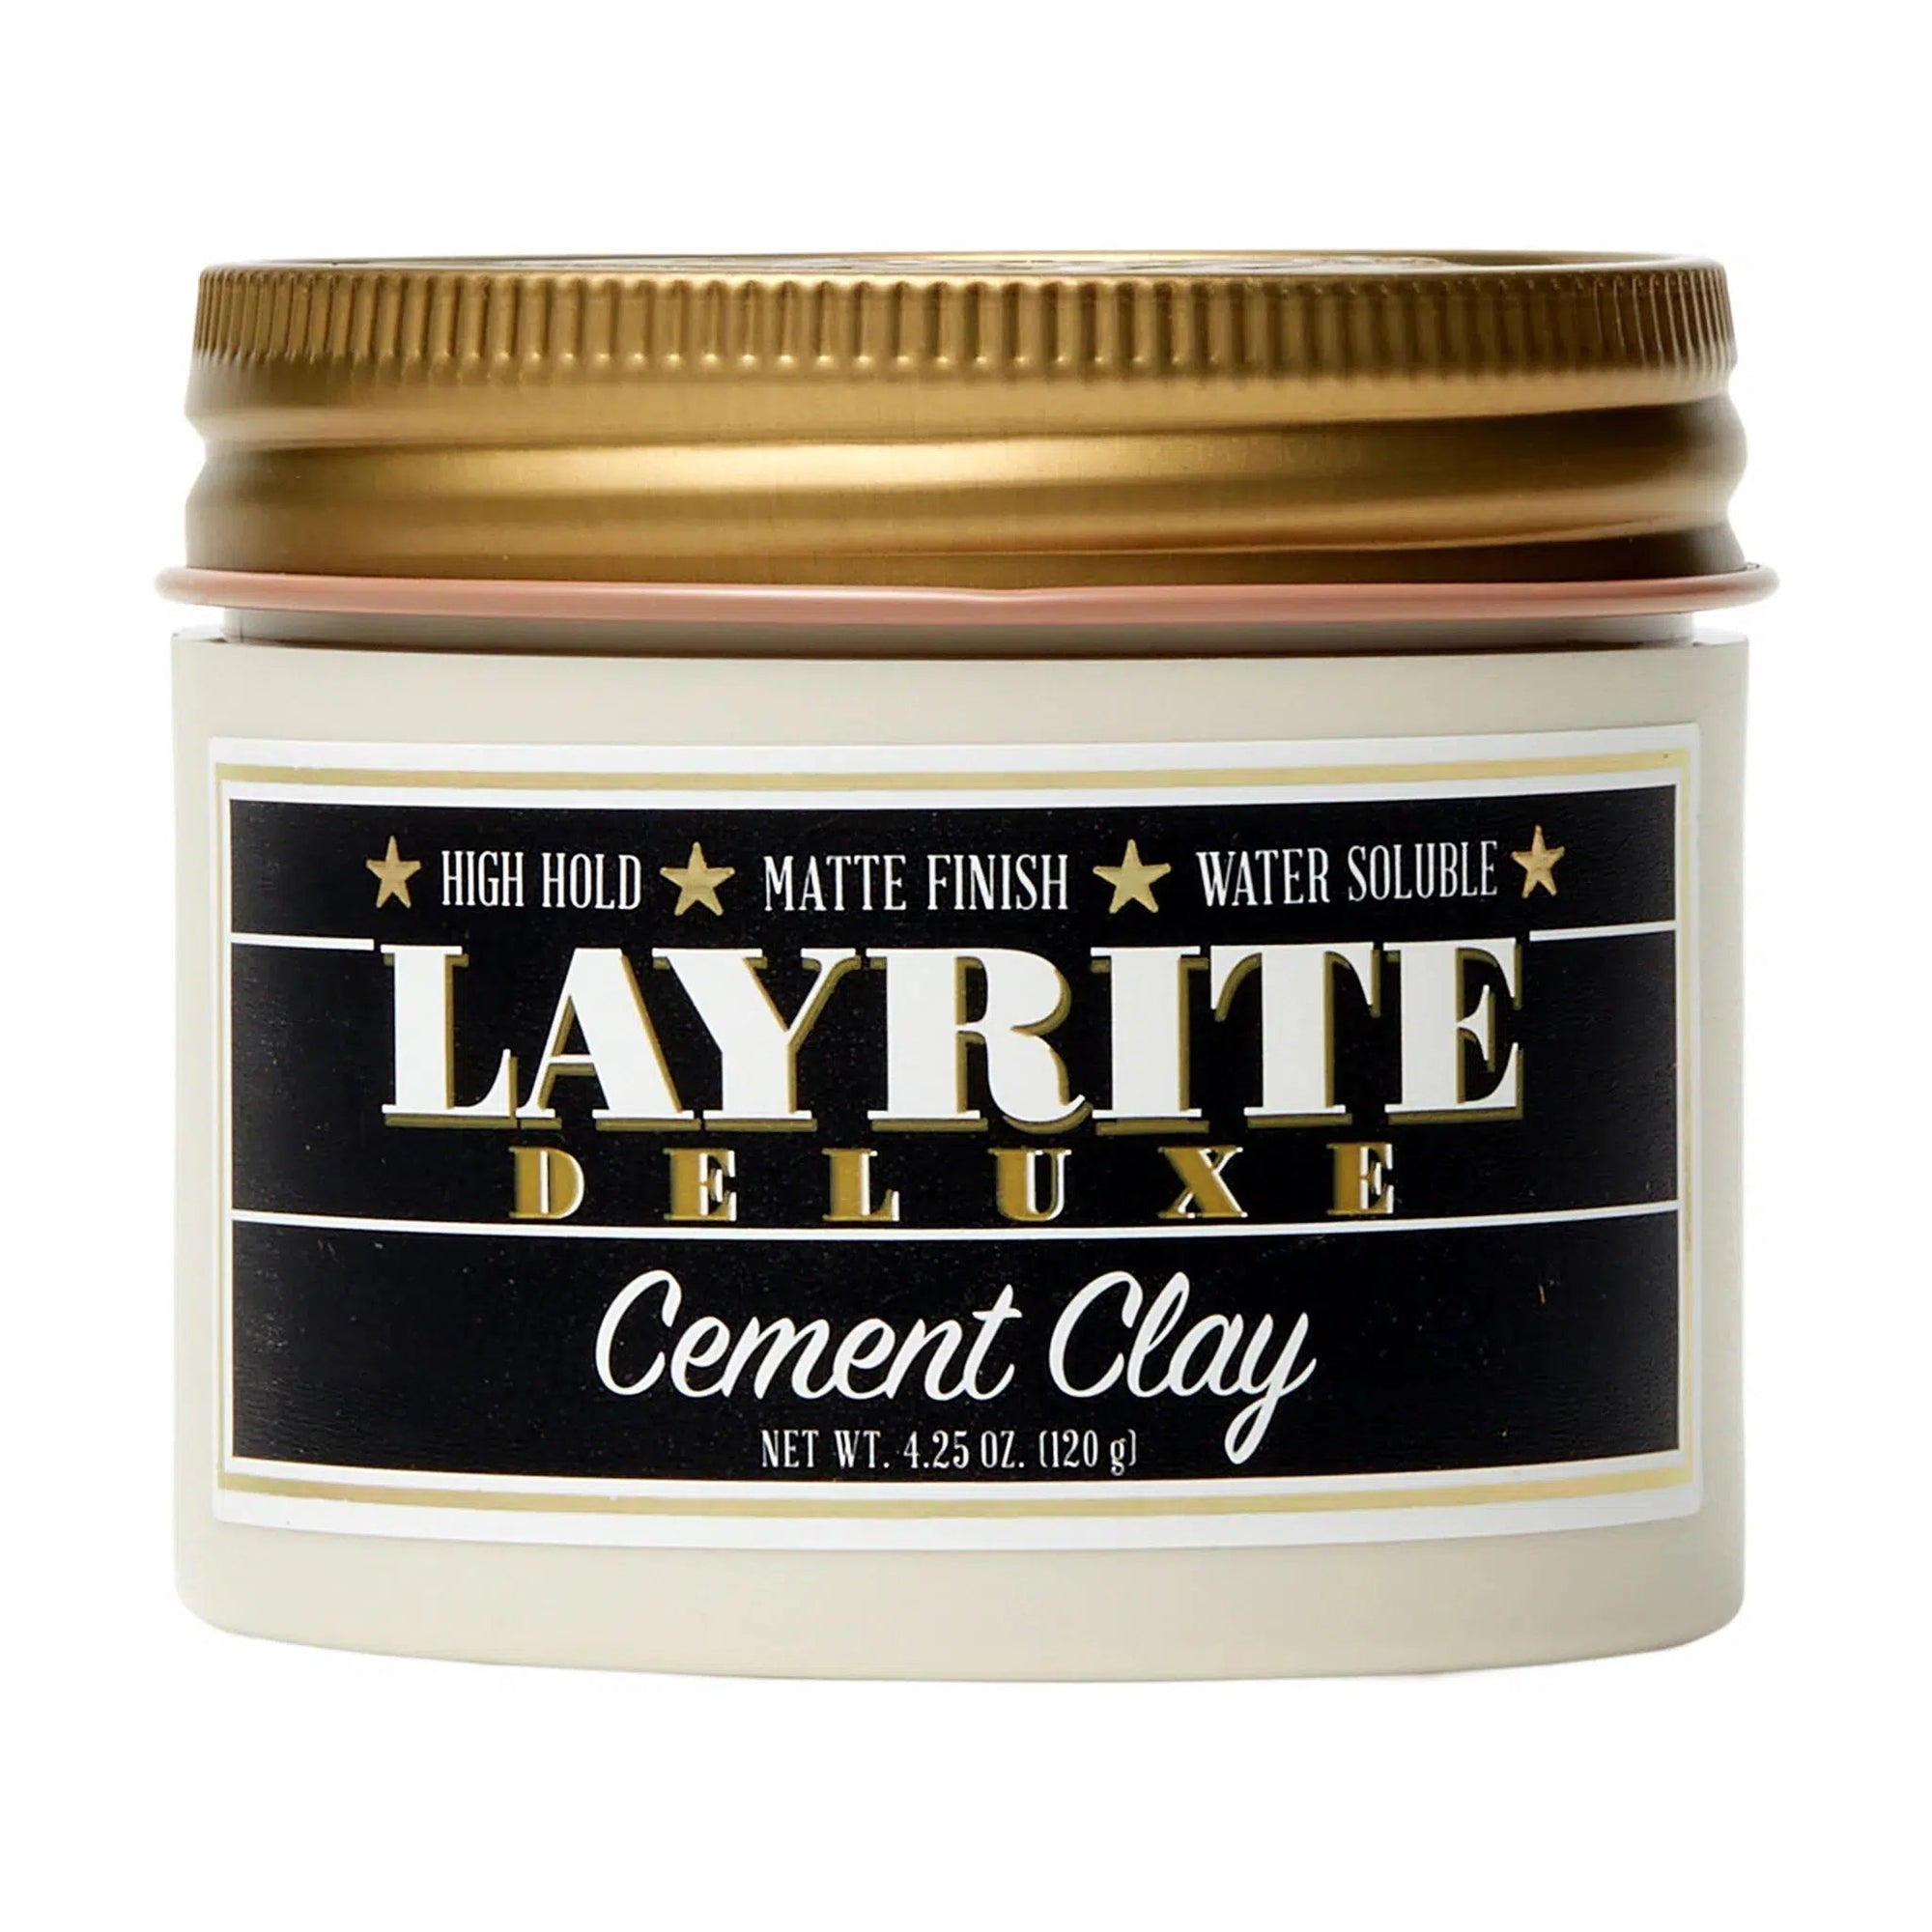 Layrite cement high hold 113gr